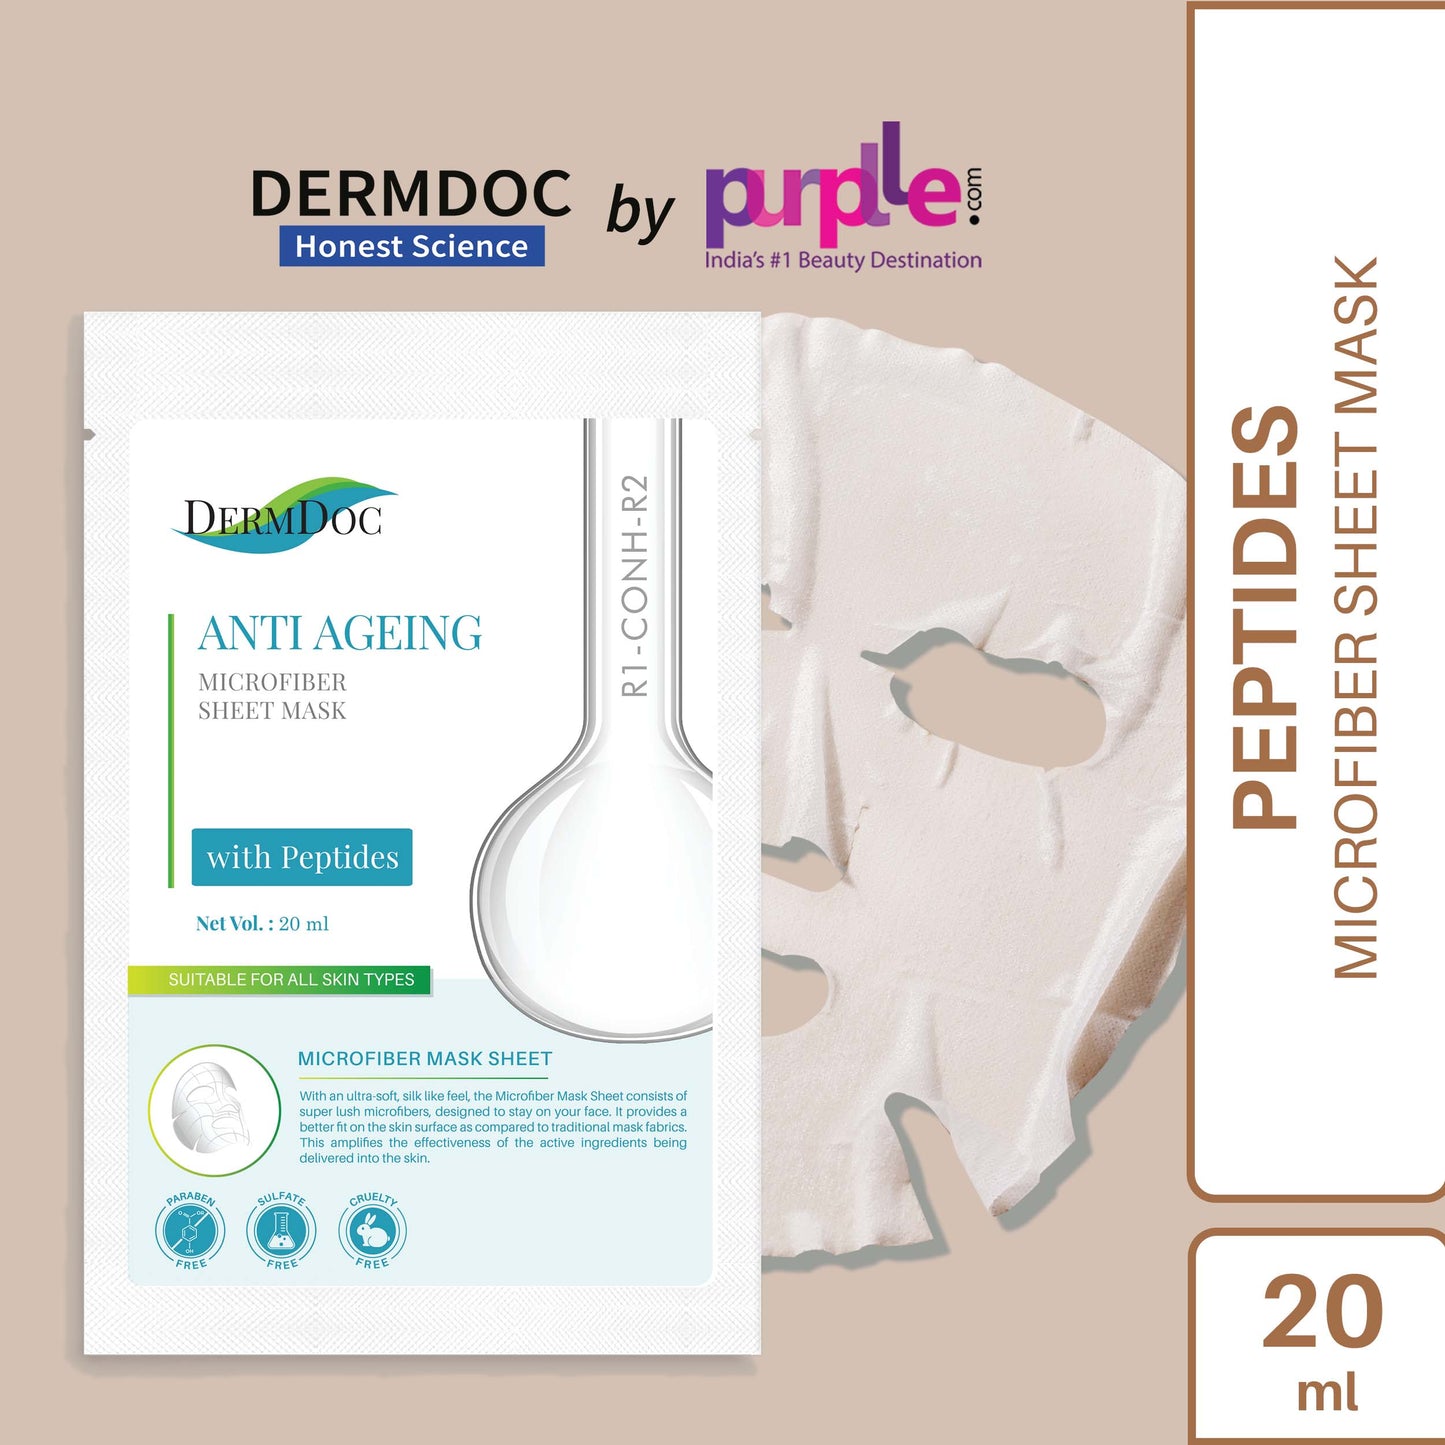 DermDoc Age Defying Microfiber Sheet Mask with Peptides (20 ml)